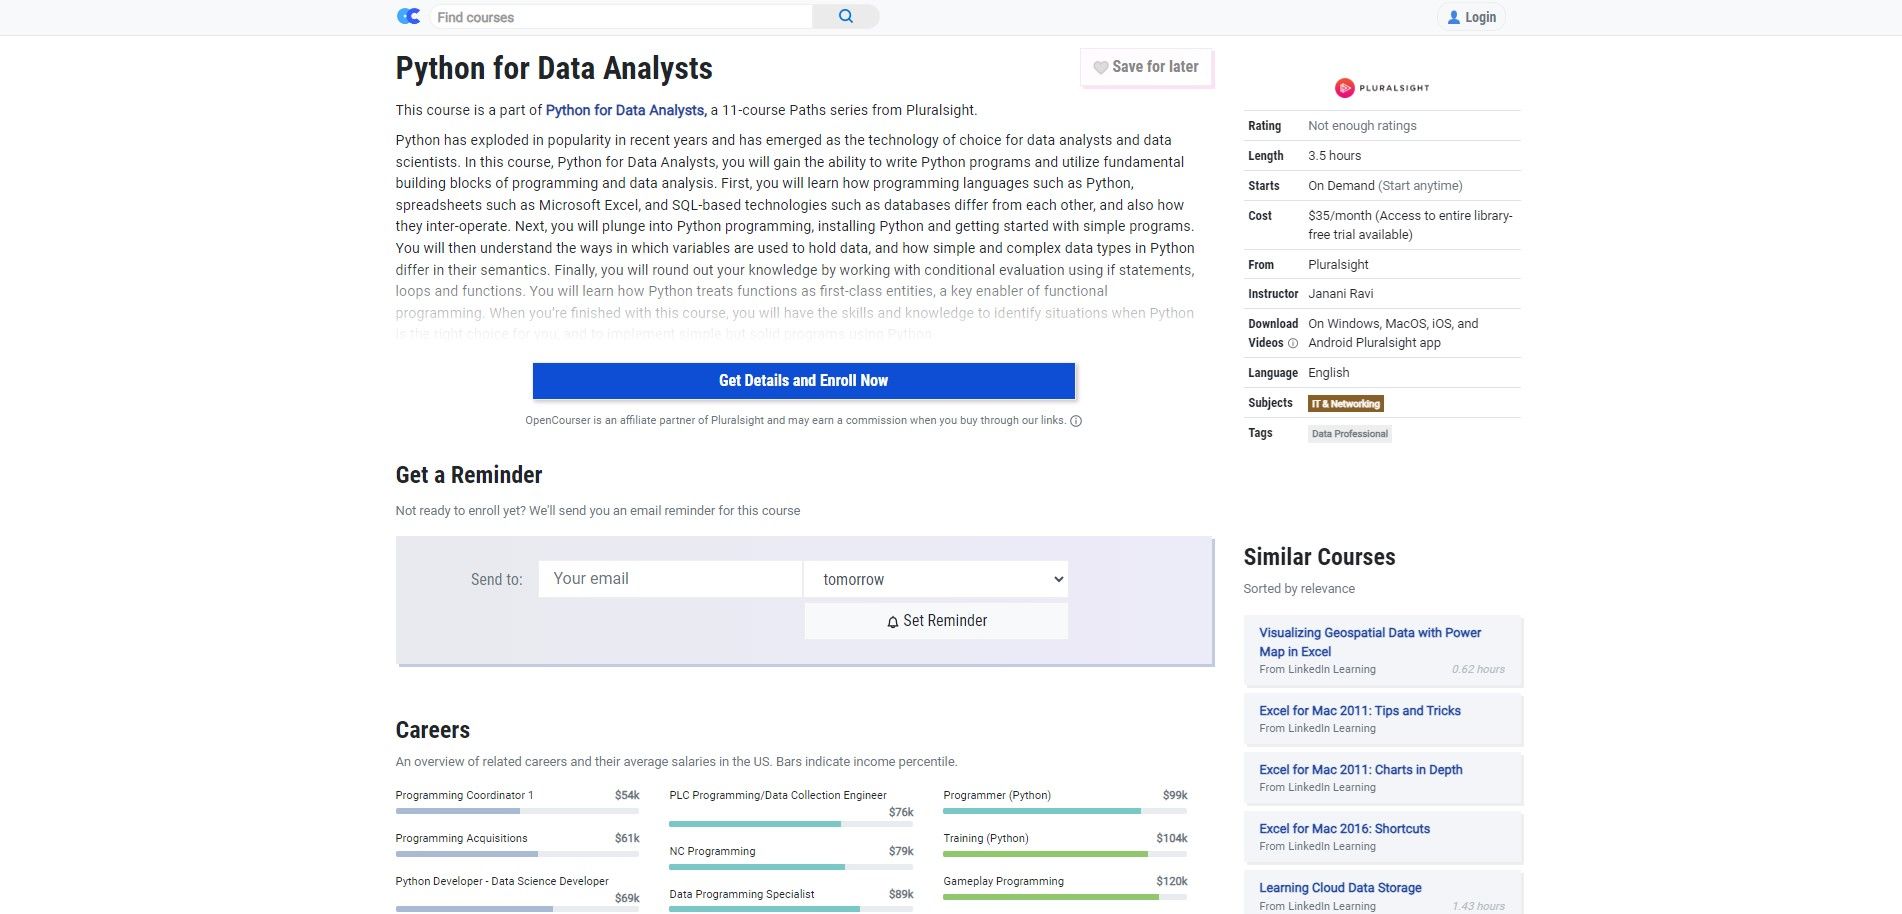 Python for data analysts course details on OpenCourser website